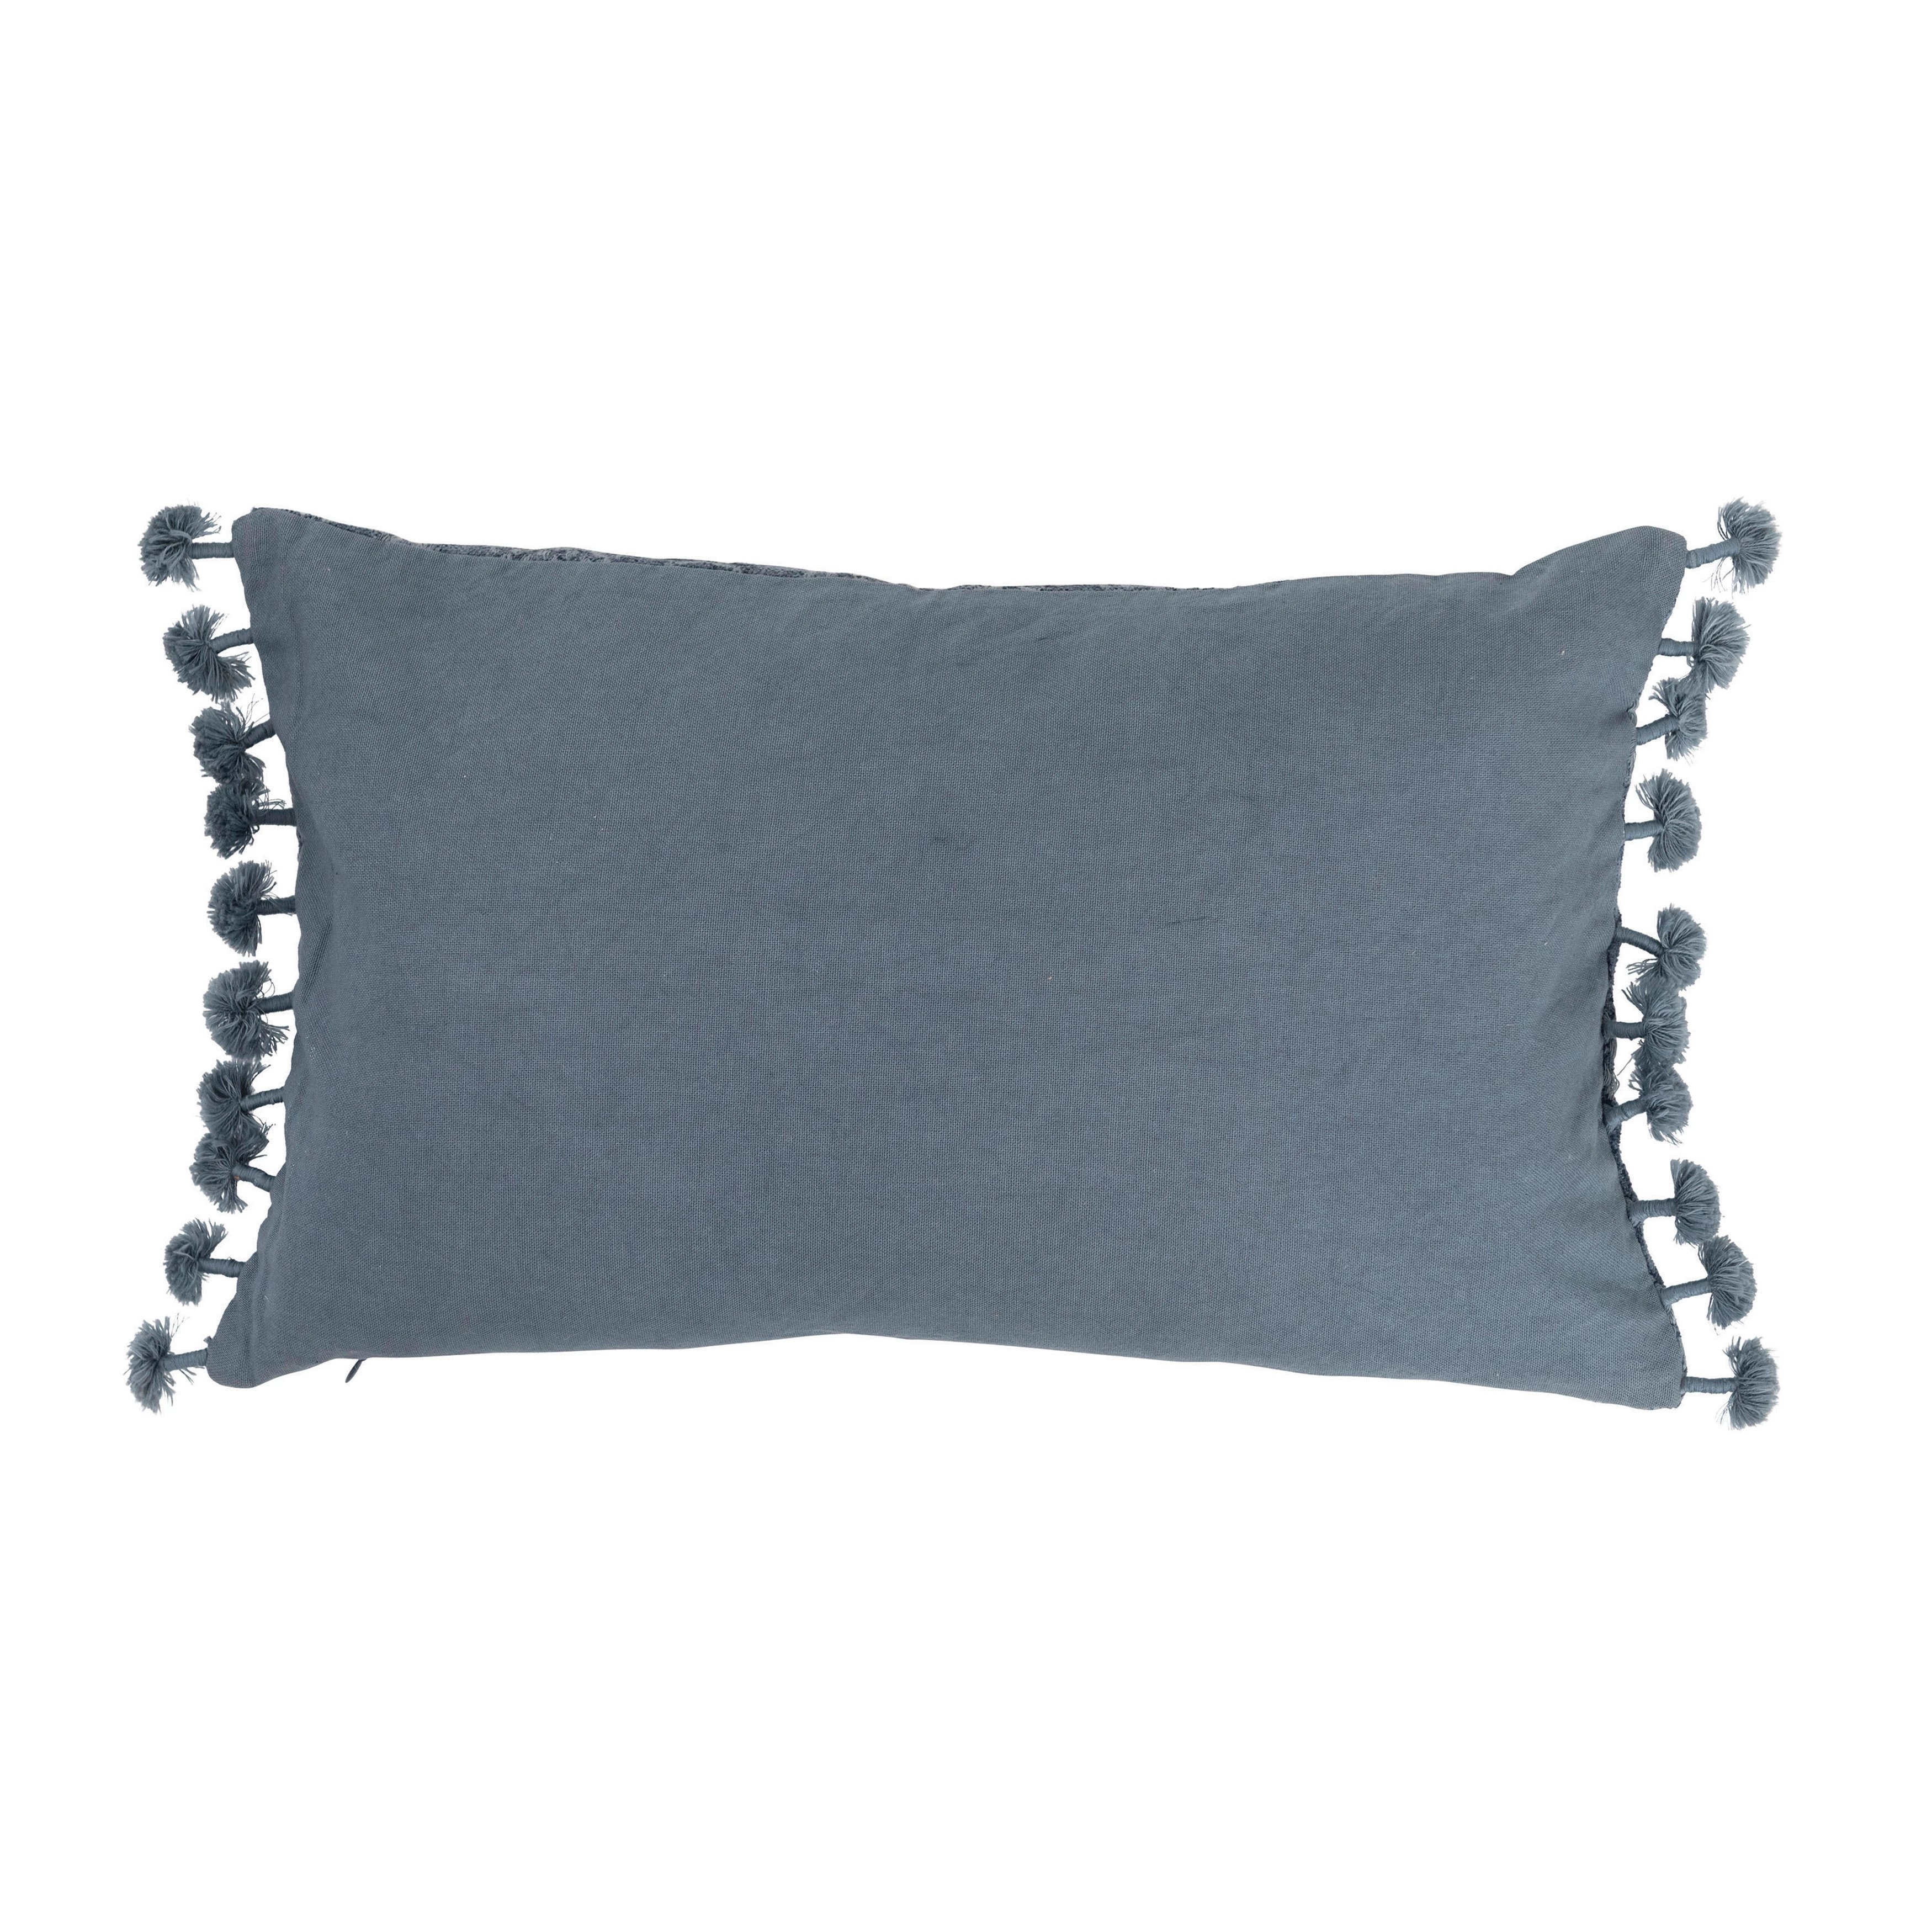 Cotton Chenille Lumbar Pillow with Embroidery and Tassels - Image 1